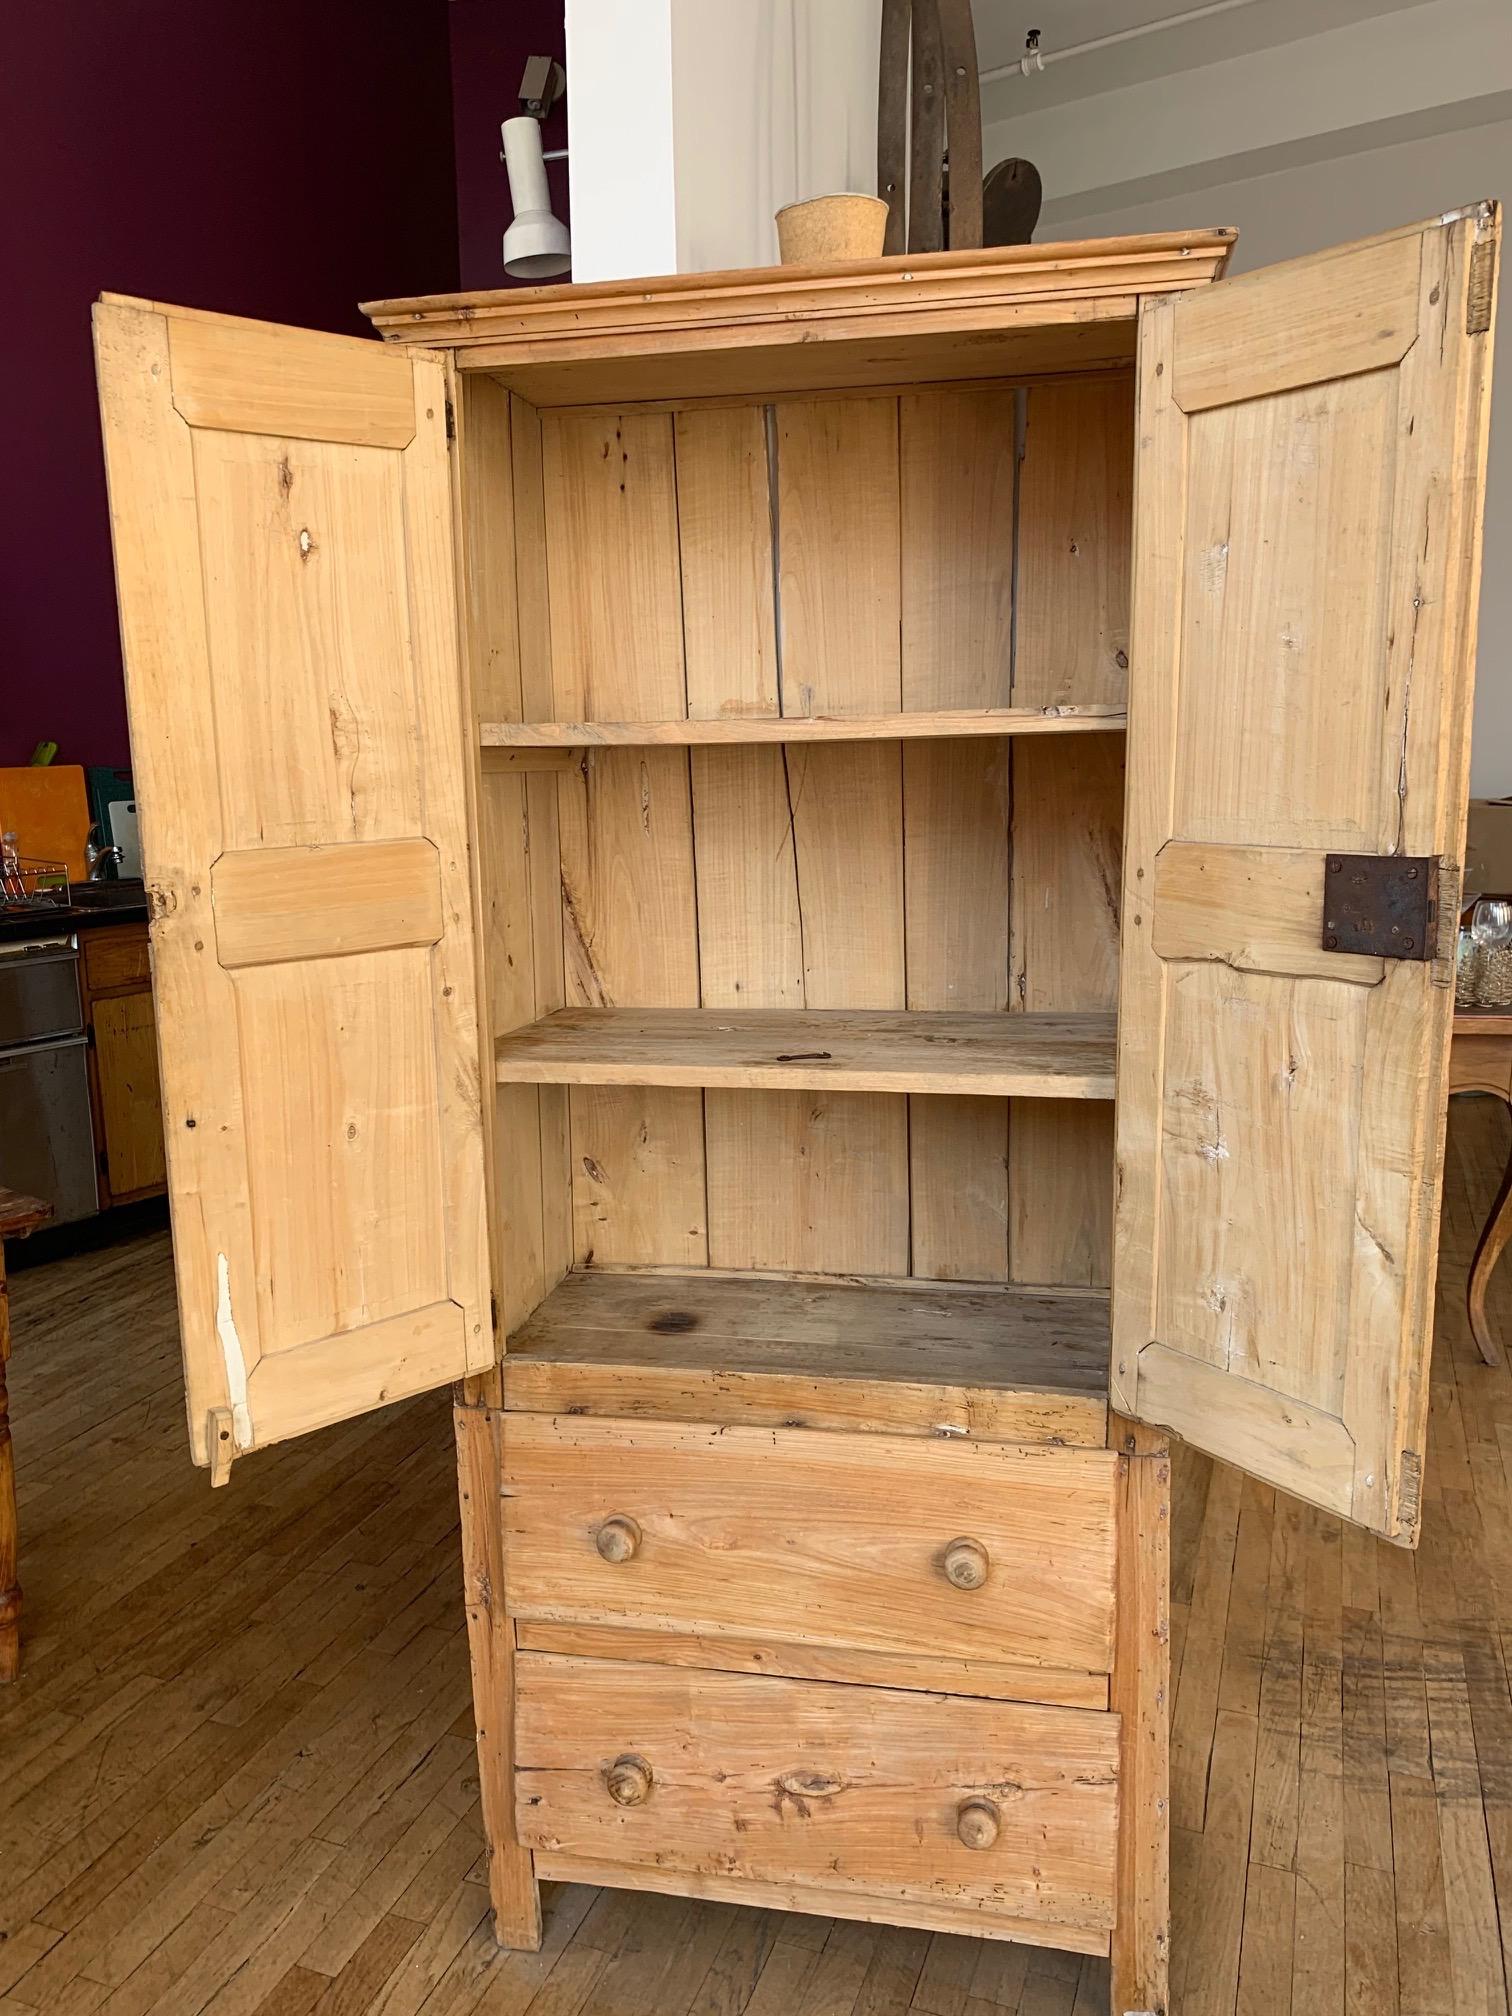 19th century American pine armoire with drawer. This armoire offers different types of storage; The cabinets themselves open up to reveal three shelves, however additional storage is provided in the two drawers which rest below the shelving unit.